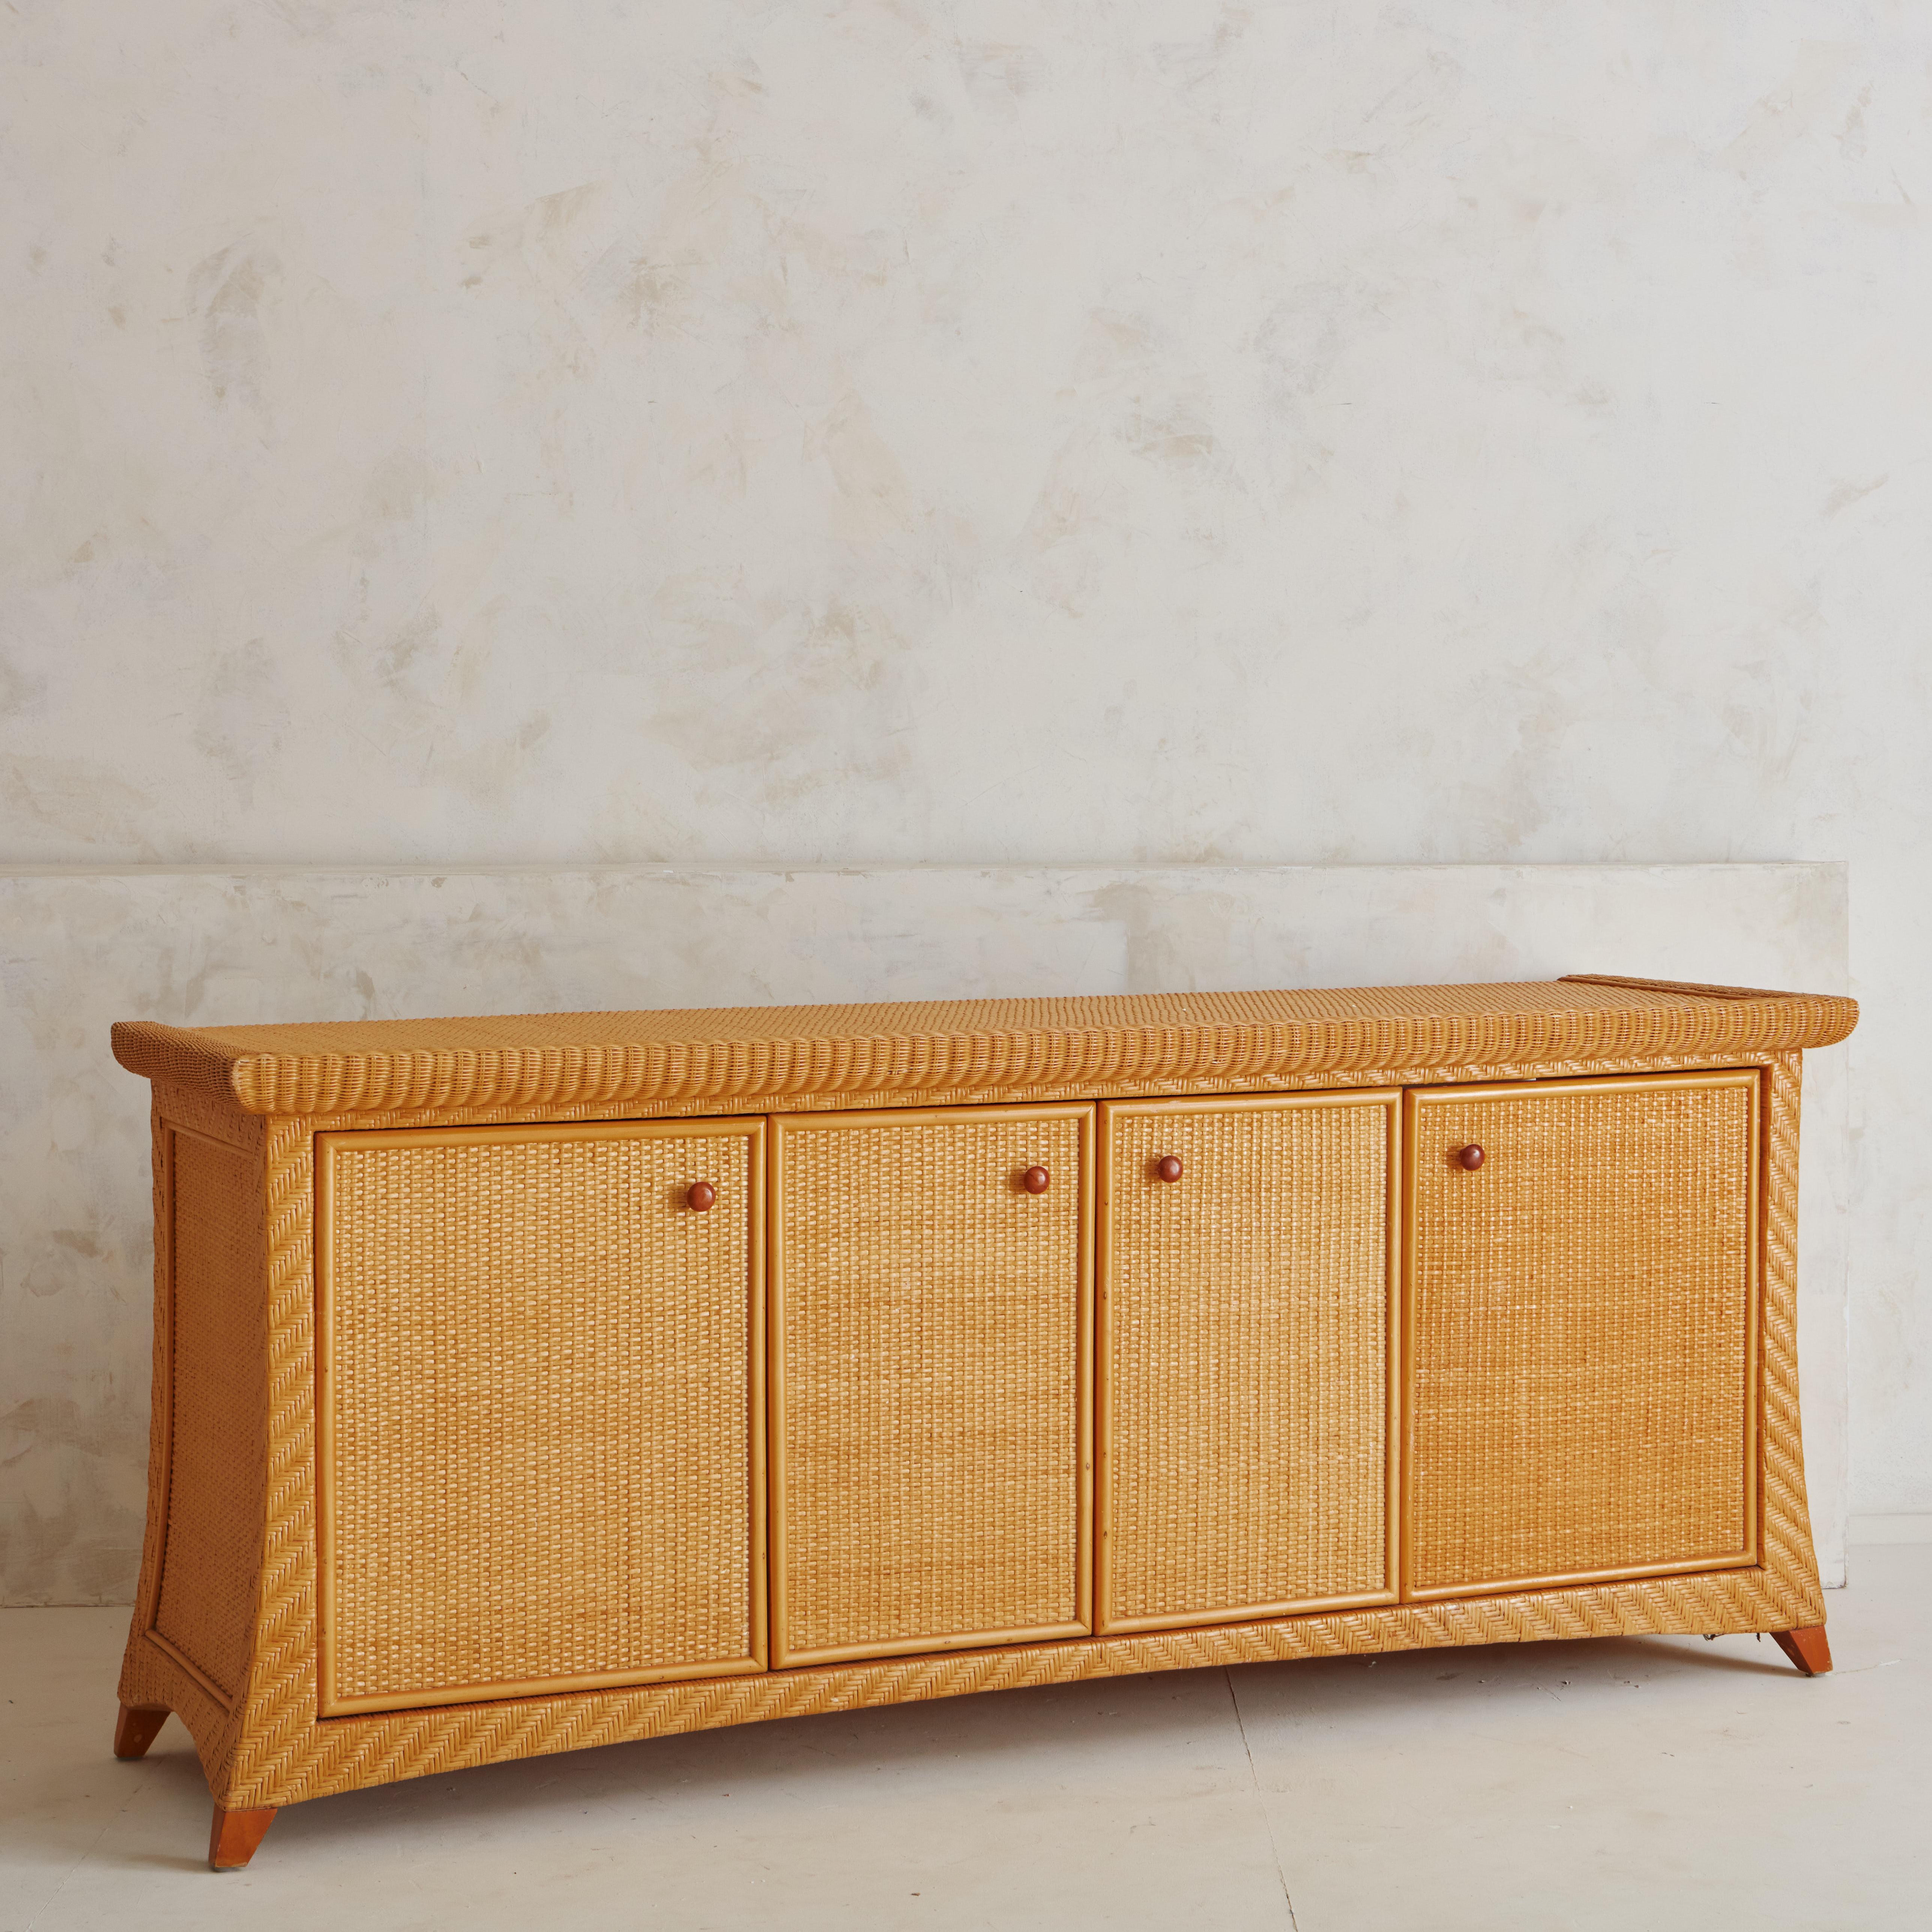 A gorgeous and uniquely shaped wicker credenza sourced from a home in the Mediterranean region of the Costa Brava, Spain. The wicker features warm honey tones and the shape of the credenza has a wonderful flair on each side. Two cabinet doors open